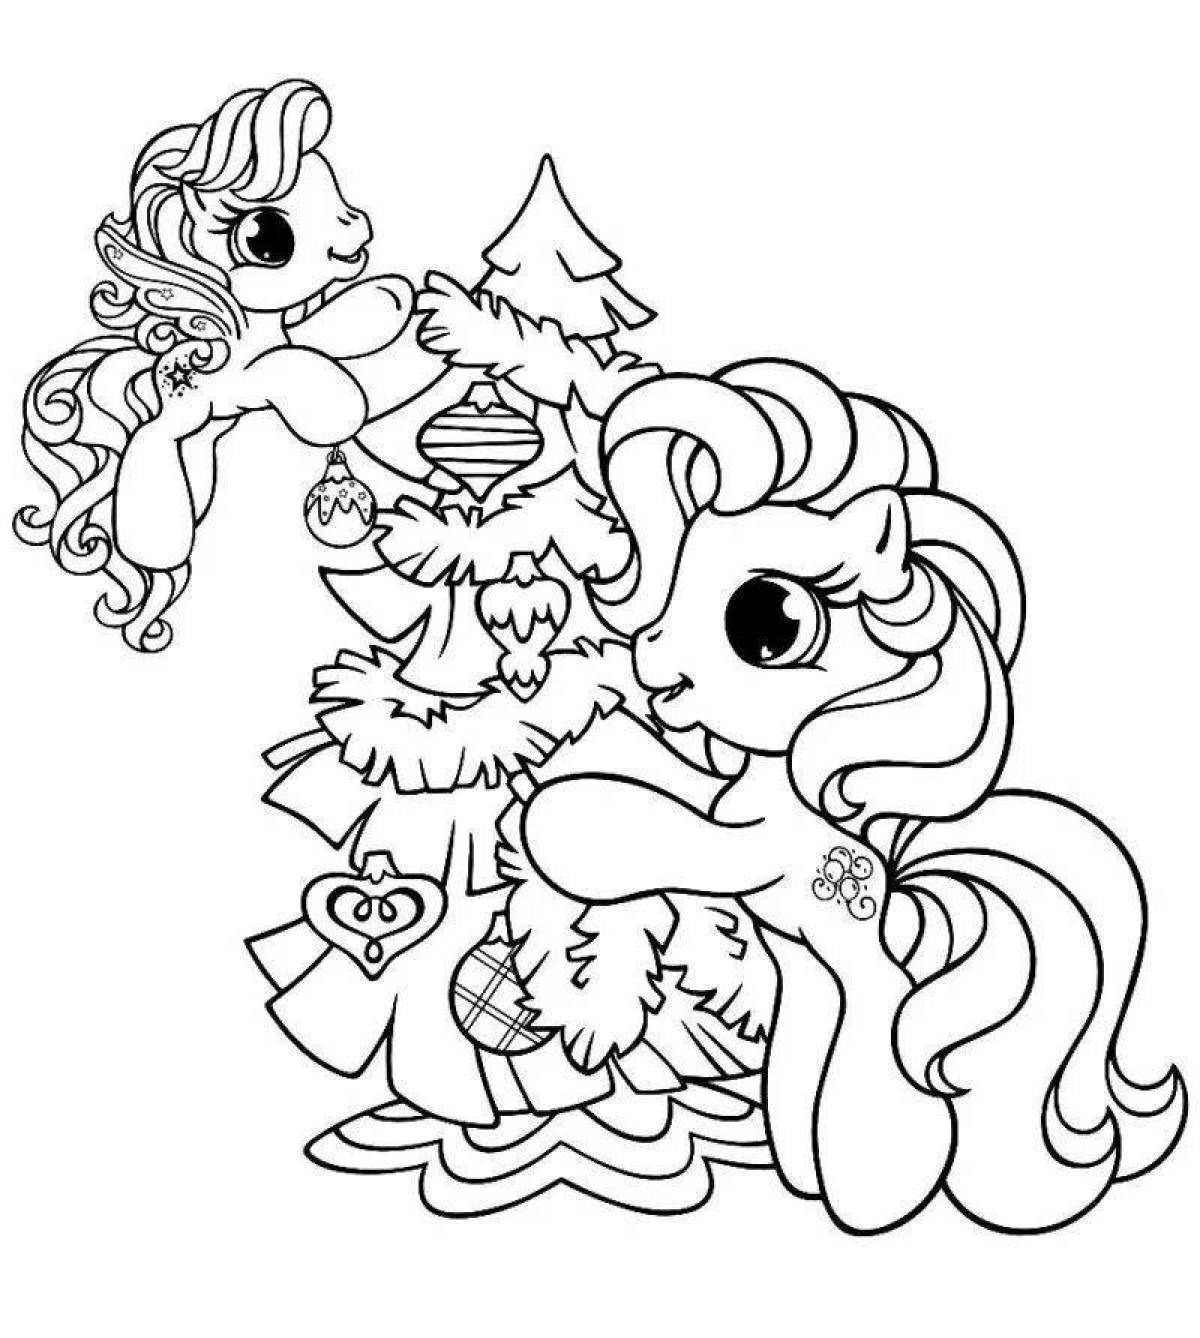 Fancy new coloring pages